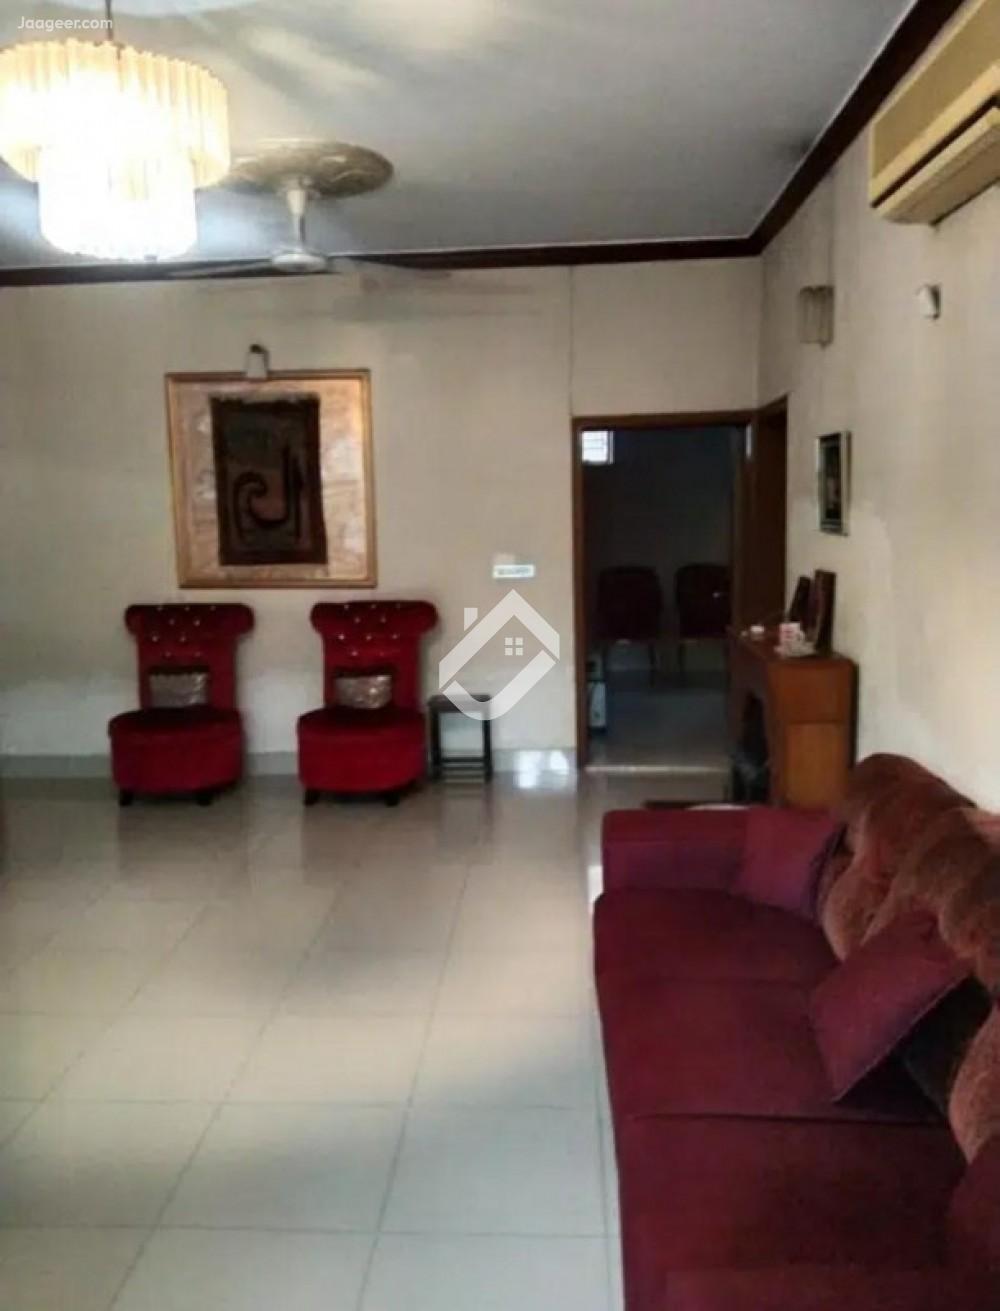 View  1 Kanal Double Storey House For Sale In DHA Phase 3  in DHA Phase 3, Lahore